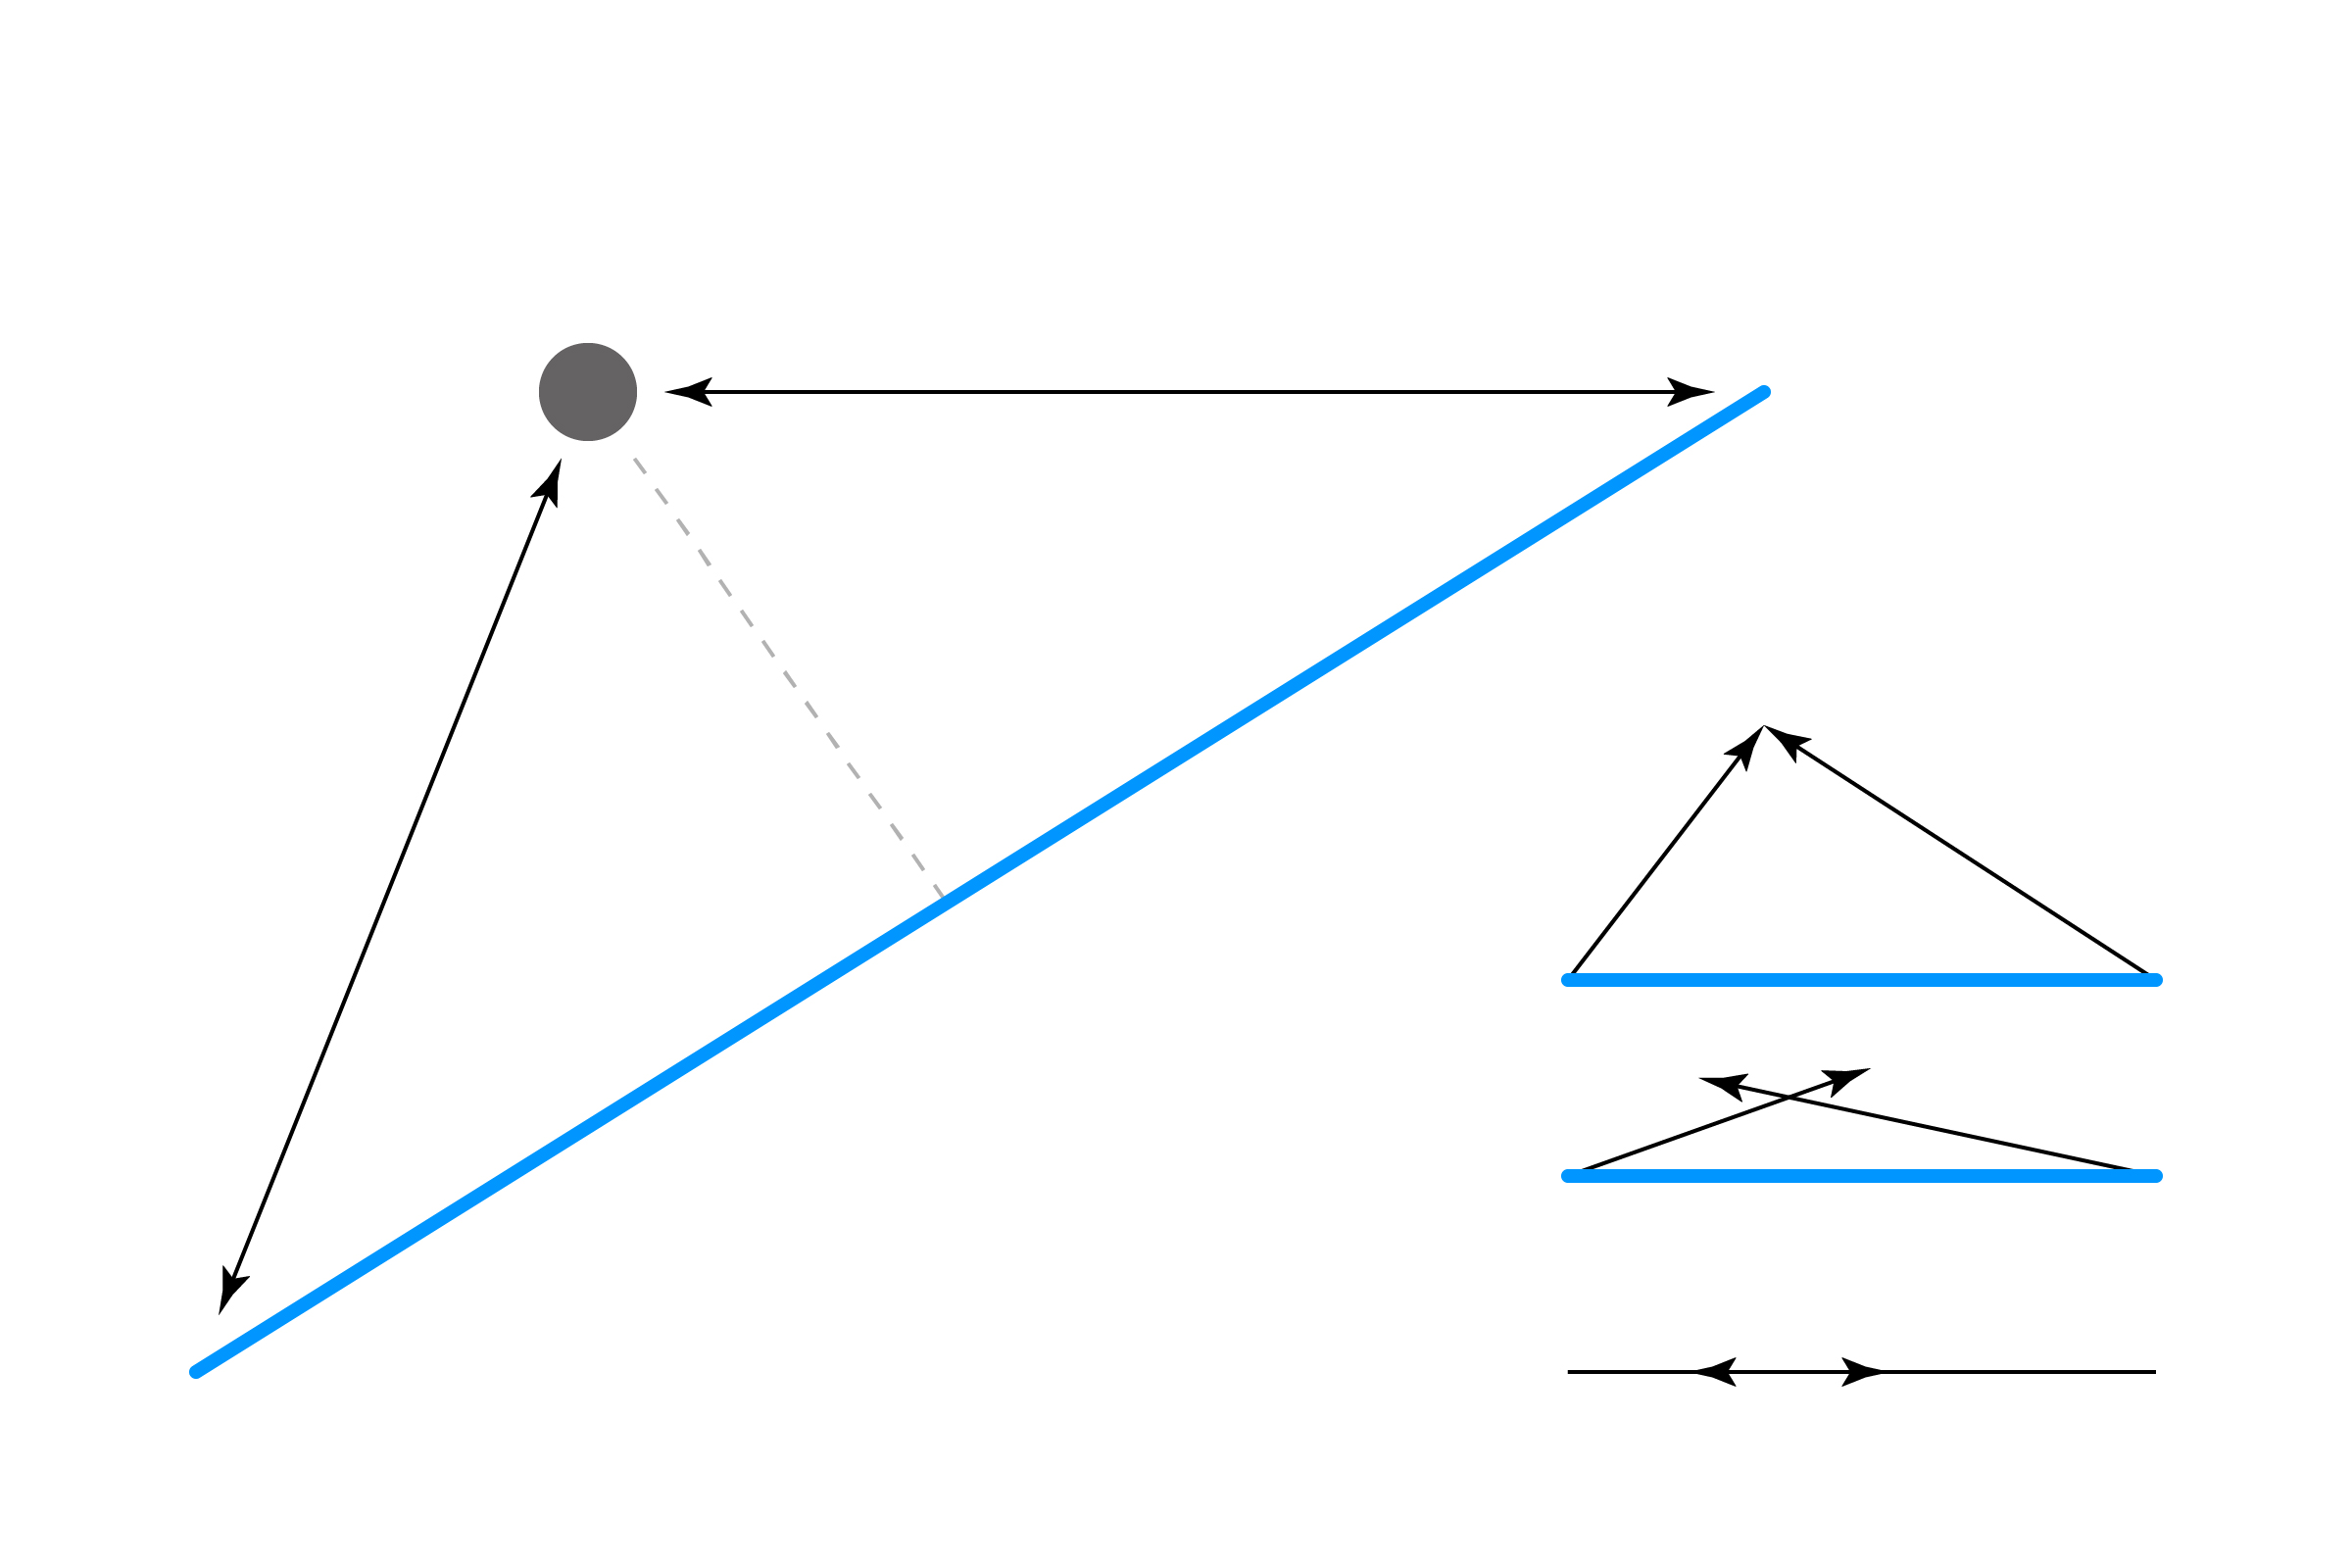 Forming triangles between a point and line